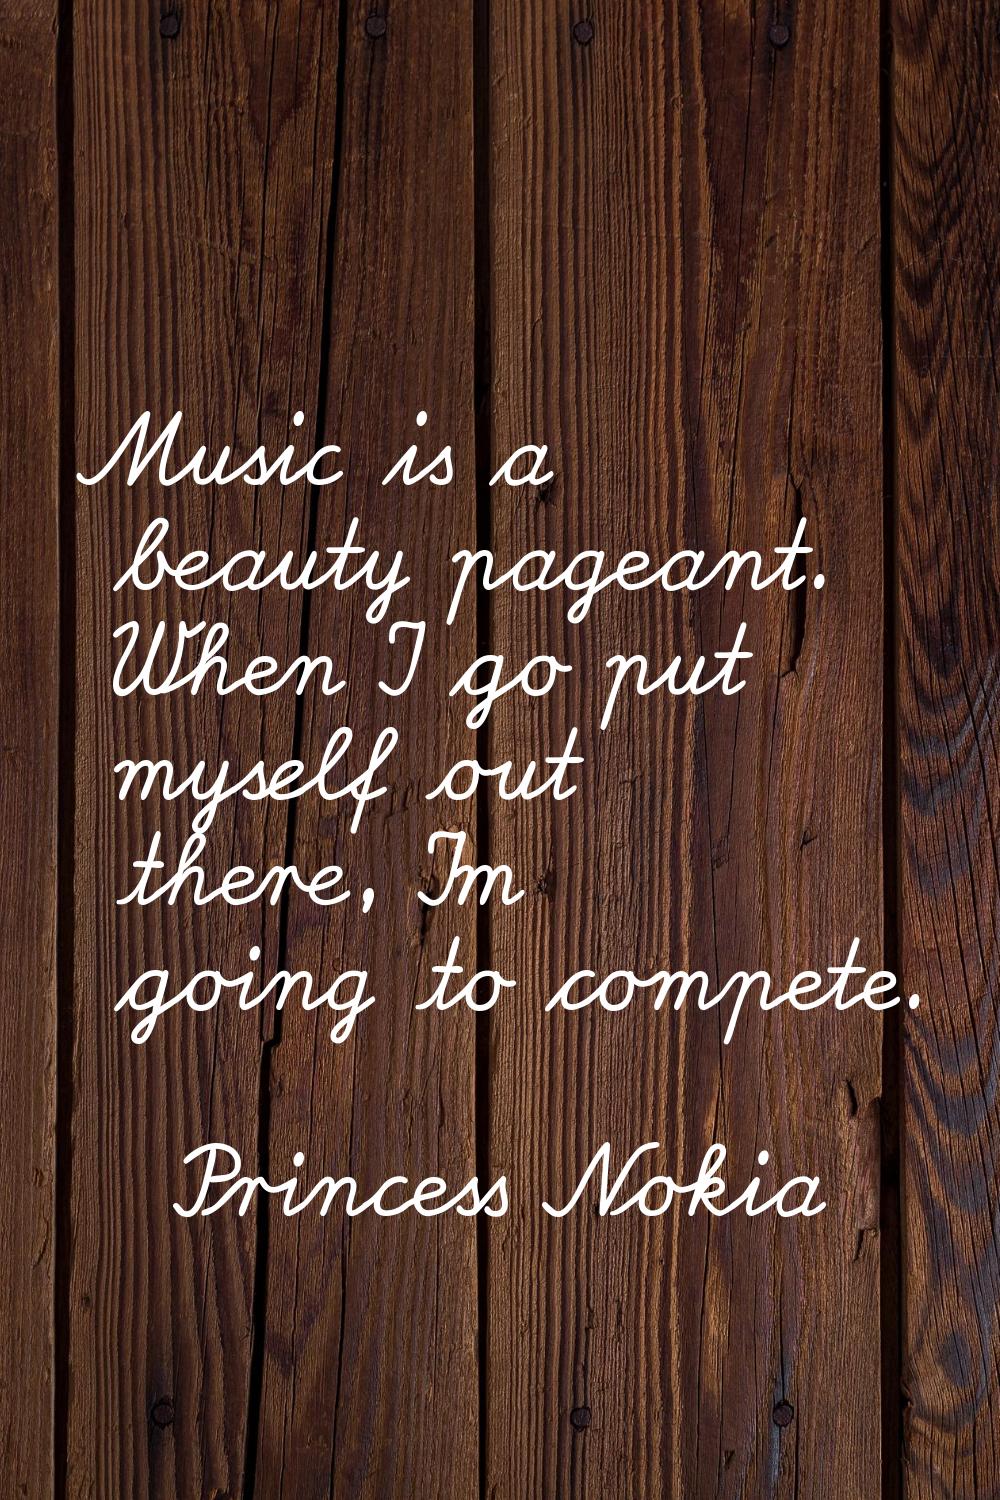 Music is a beauty pageant. When I go put myself out there, I'm going to compete.